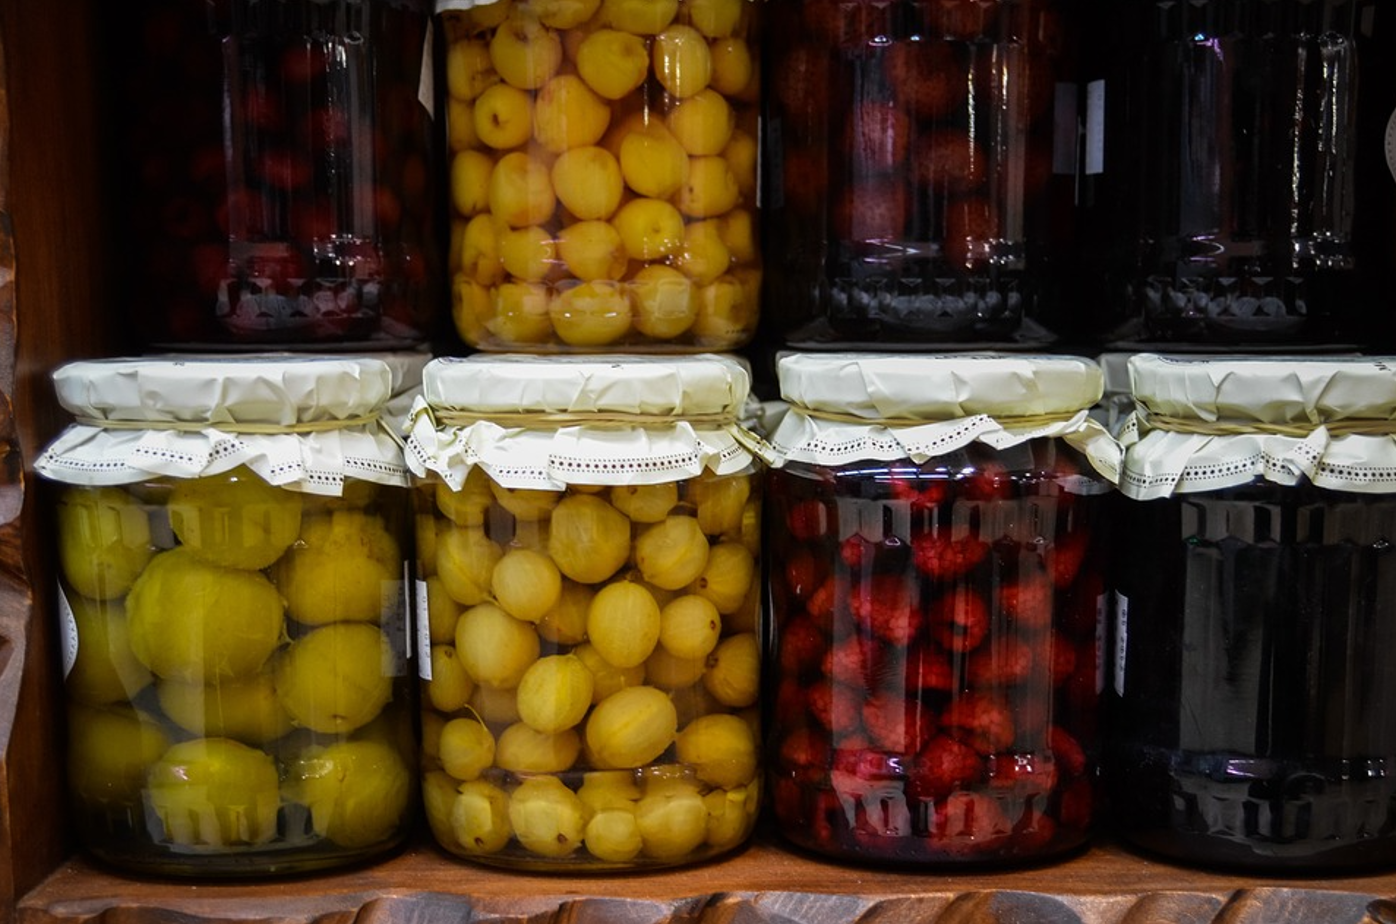 Why a jar of compote is bloated